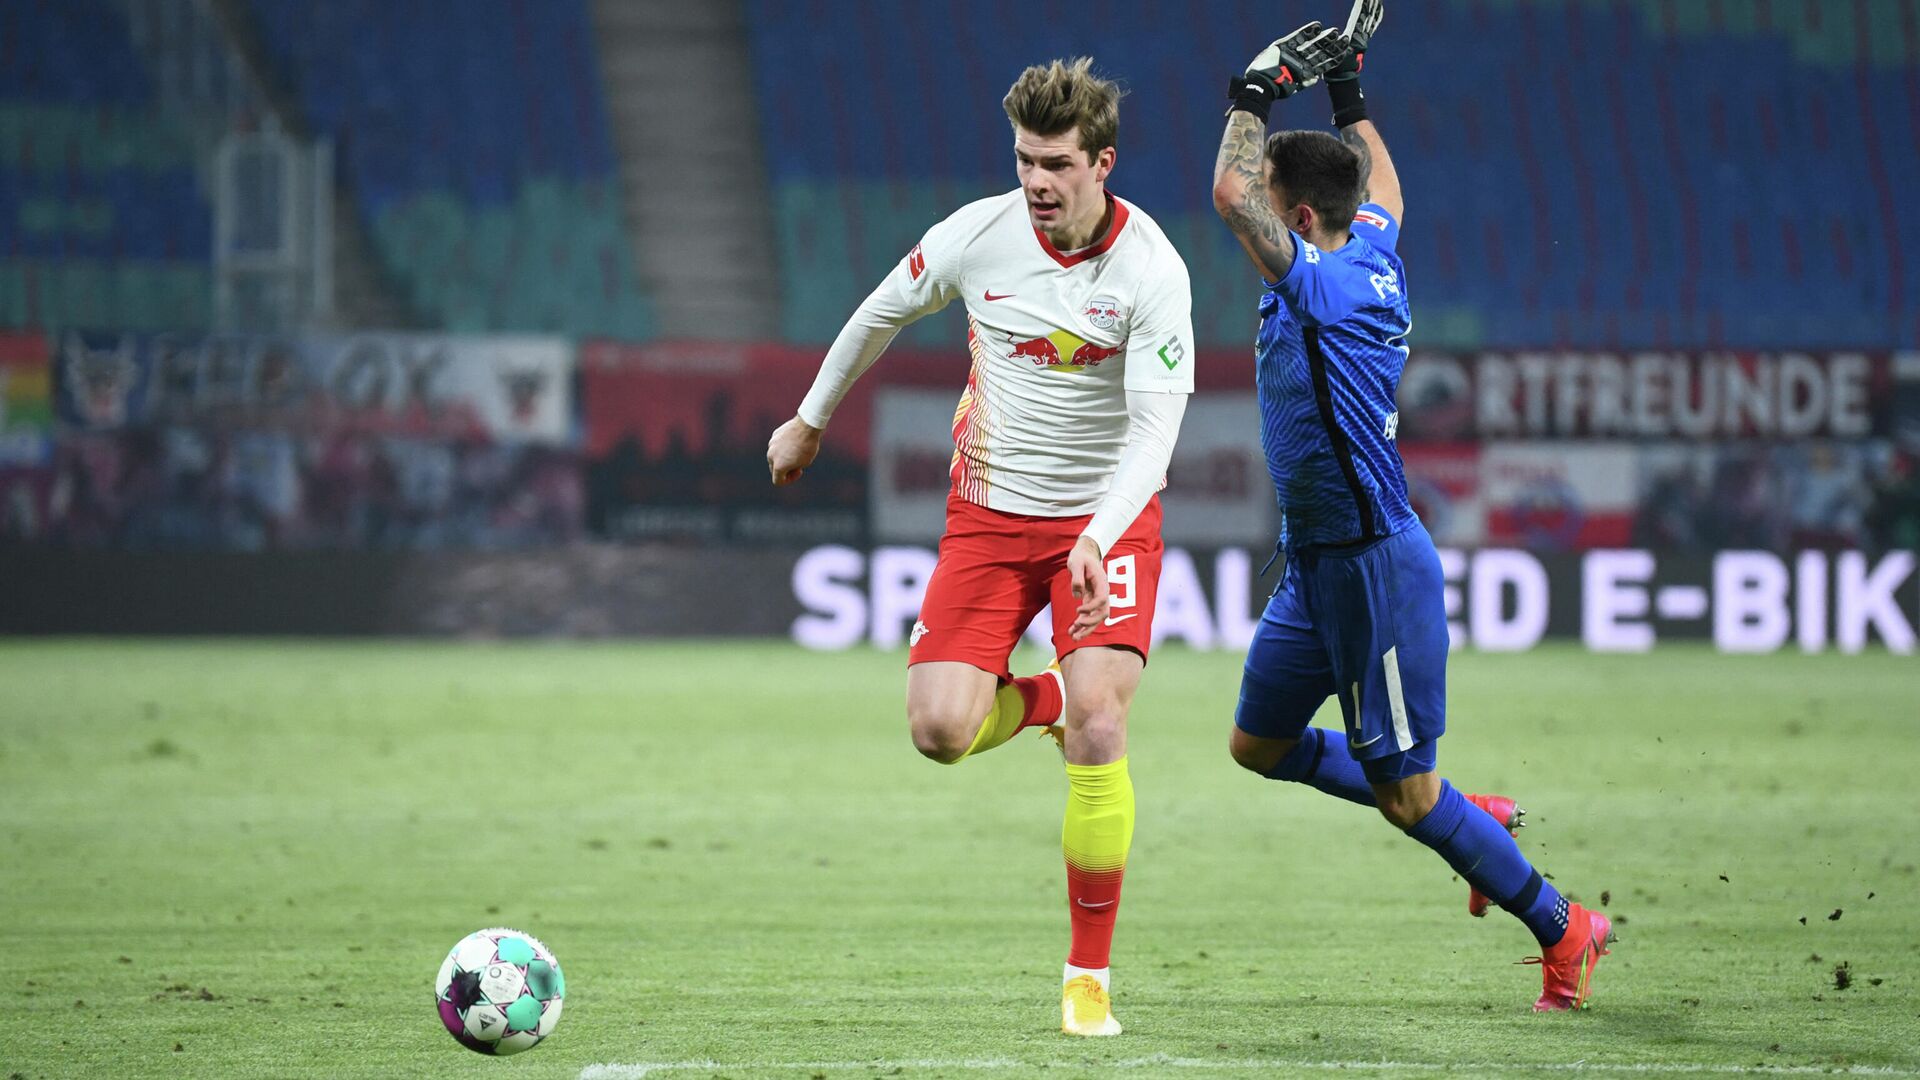 Leipzig's Norwegian forward Alexander Sorloth (L) and Augsburg's Polish goalkeeper Rafal Gikiewicz vie for the ball during the German first division Bundesliga football match between RB Leipzig and FC Augsburg in Leipzig, eastern Germany, on February 12, 2021. (Photo by ANNEGRET HILSE / POOL / AFP) / DFL REGULATIONS PROHIBIT ANY USE OF PHOTOGRAPHS AS IMAGE SEQUENCES AND/OR QUASI-VIDEO - РИА Новости, 1920, 13.02.2021